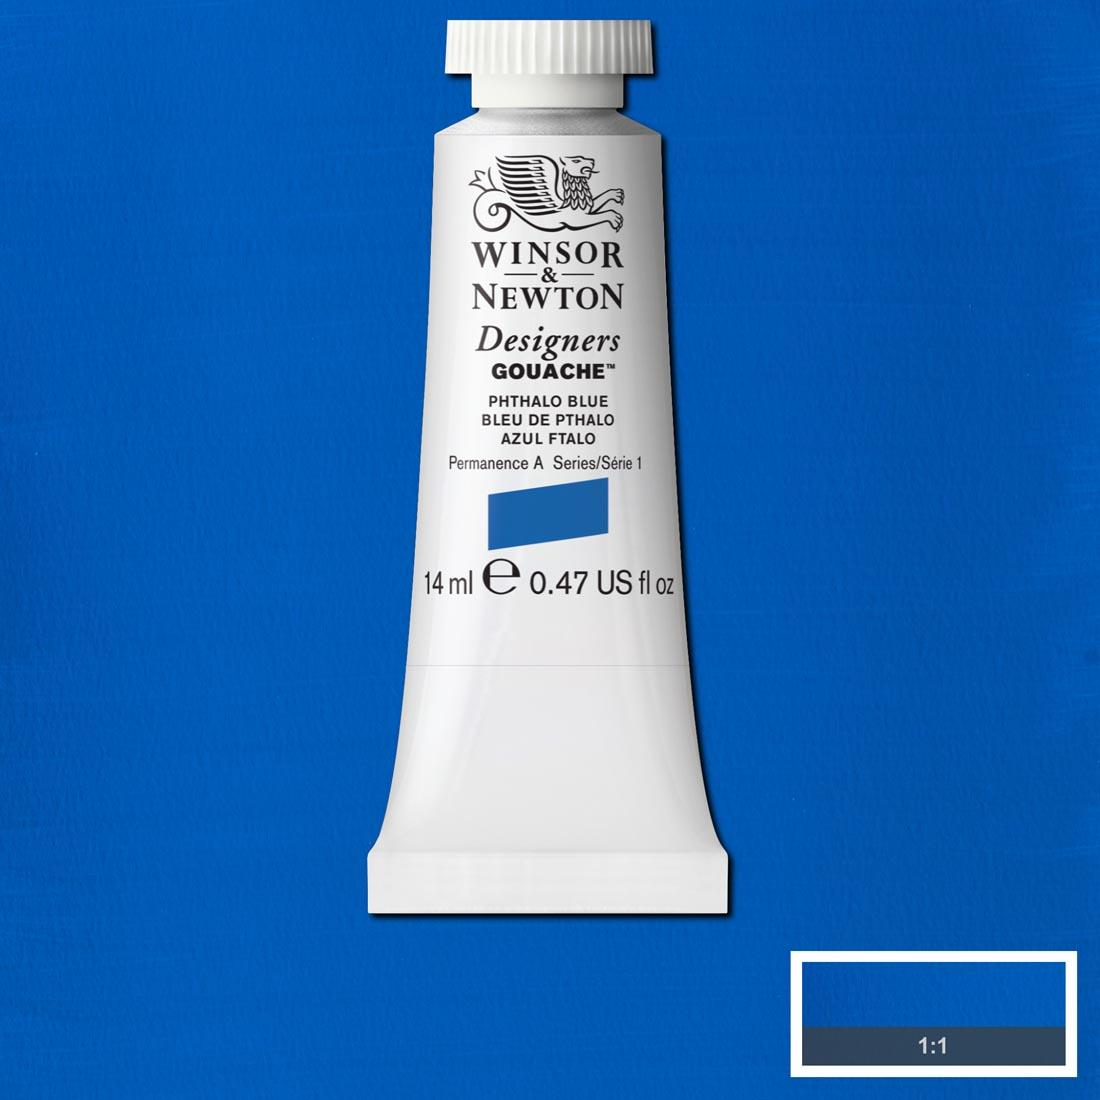 Tube of Phthalo Blue Winsor & Newton Designers Gouache with a paint swatch for the background